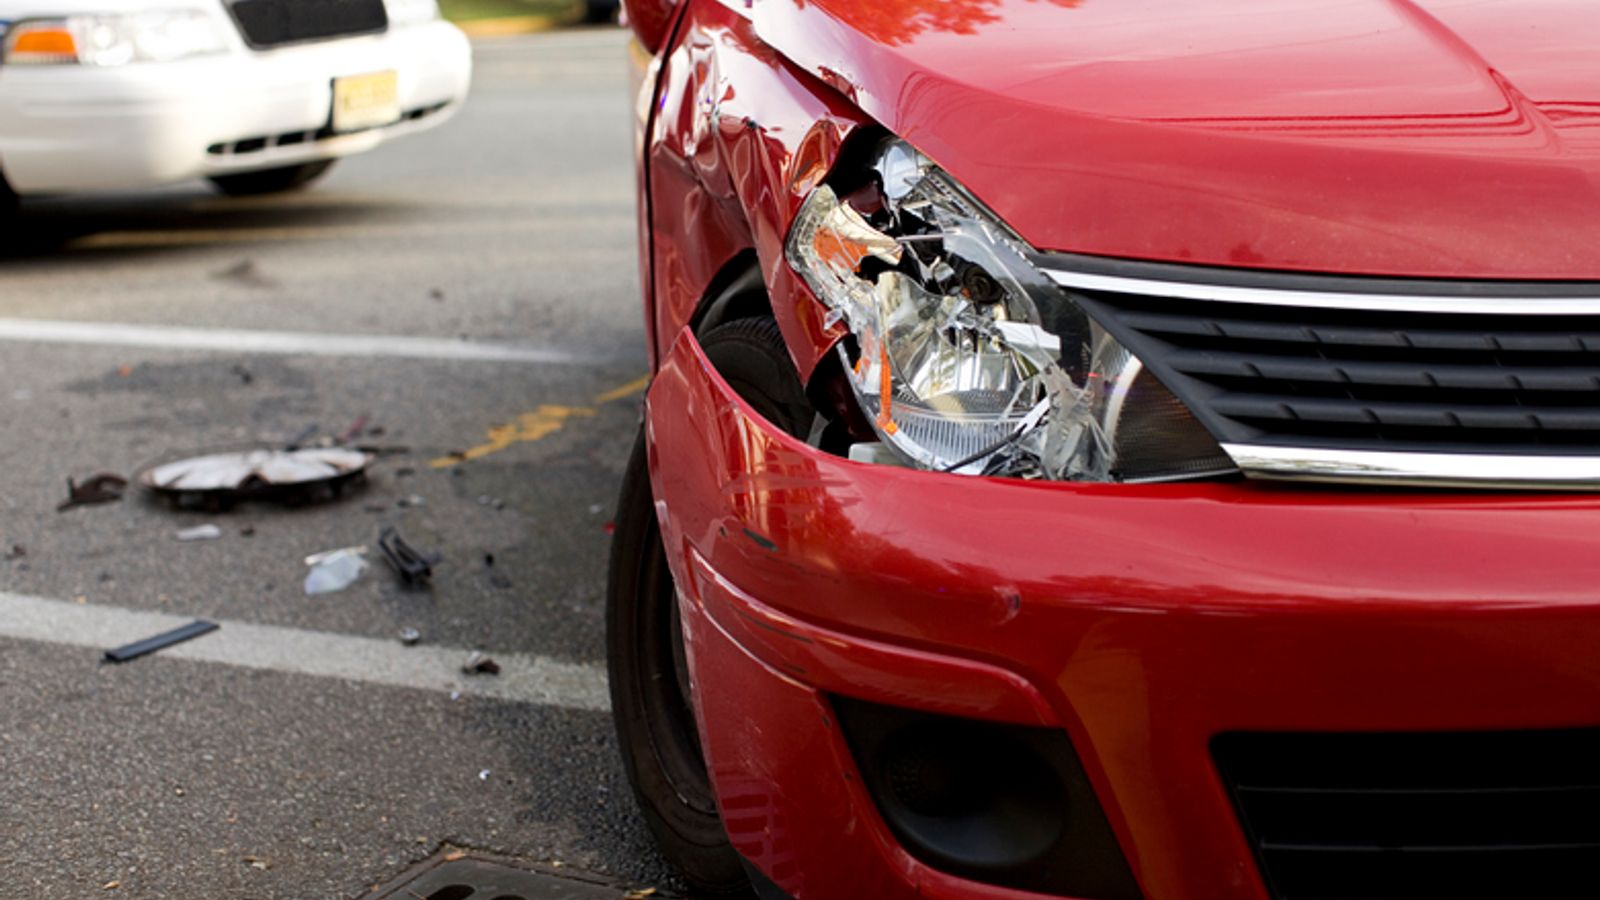 Car insurers 'absorbing rising costs as premiums stabilise'